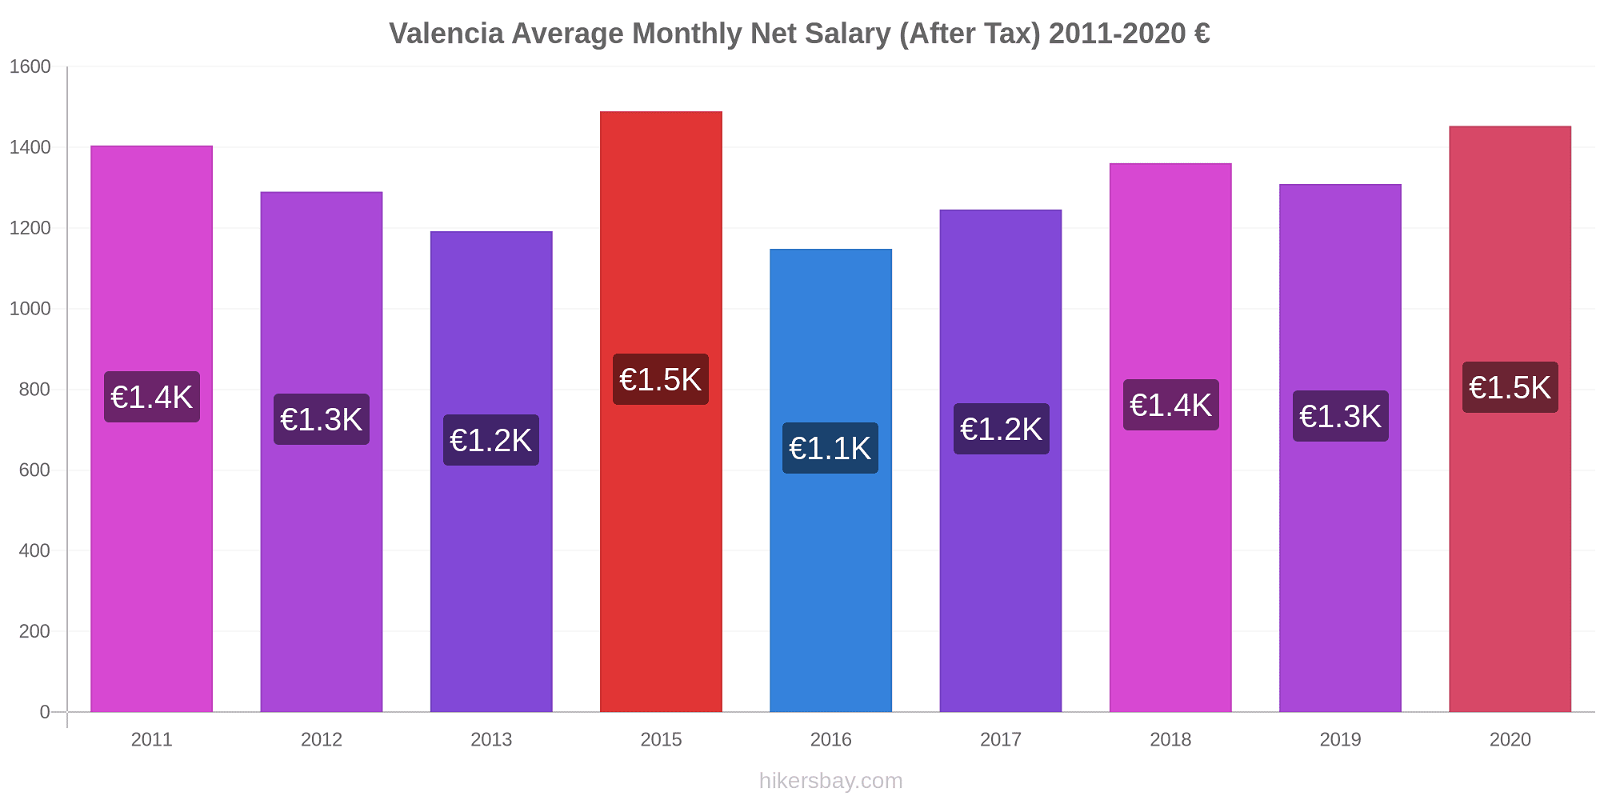 Valencia price changes Average Monthly Net Salary (After Tax) hikersbay.com